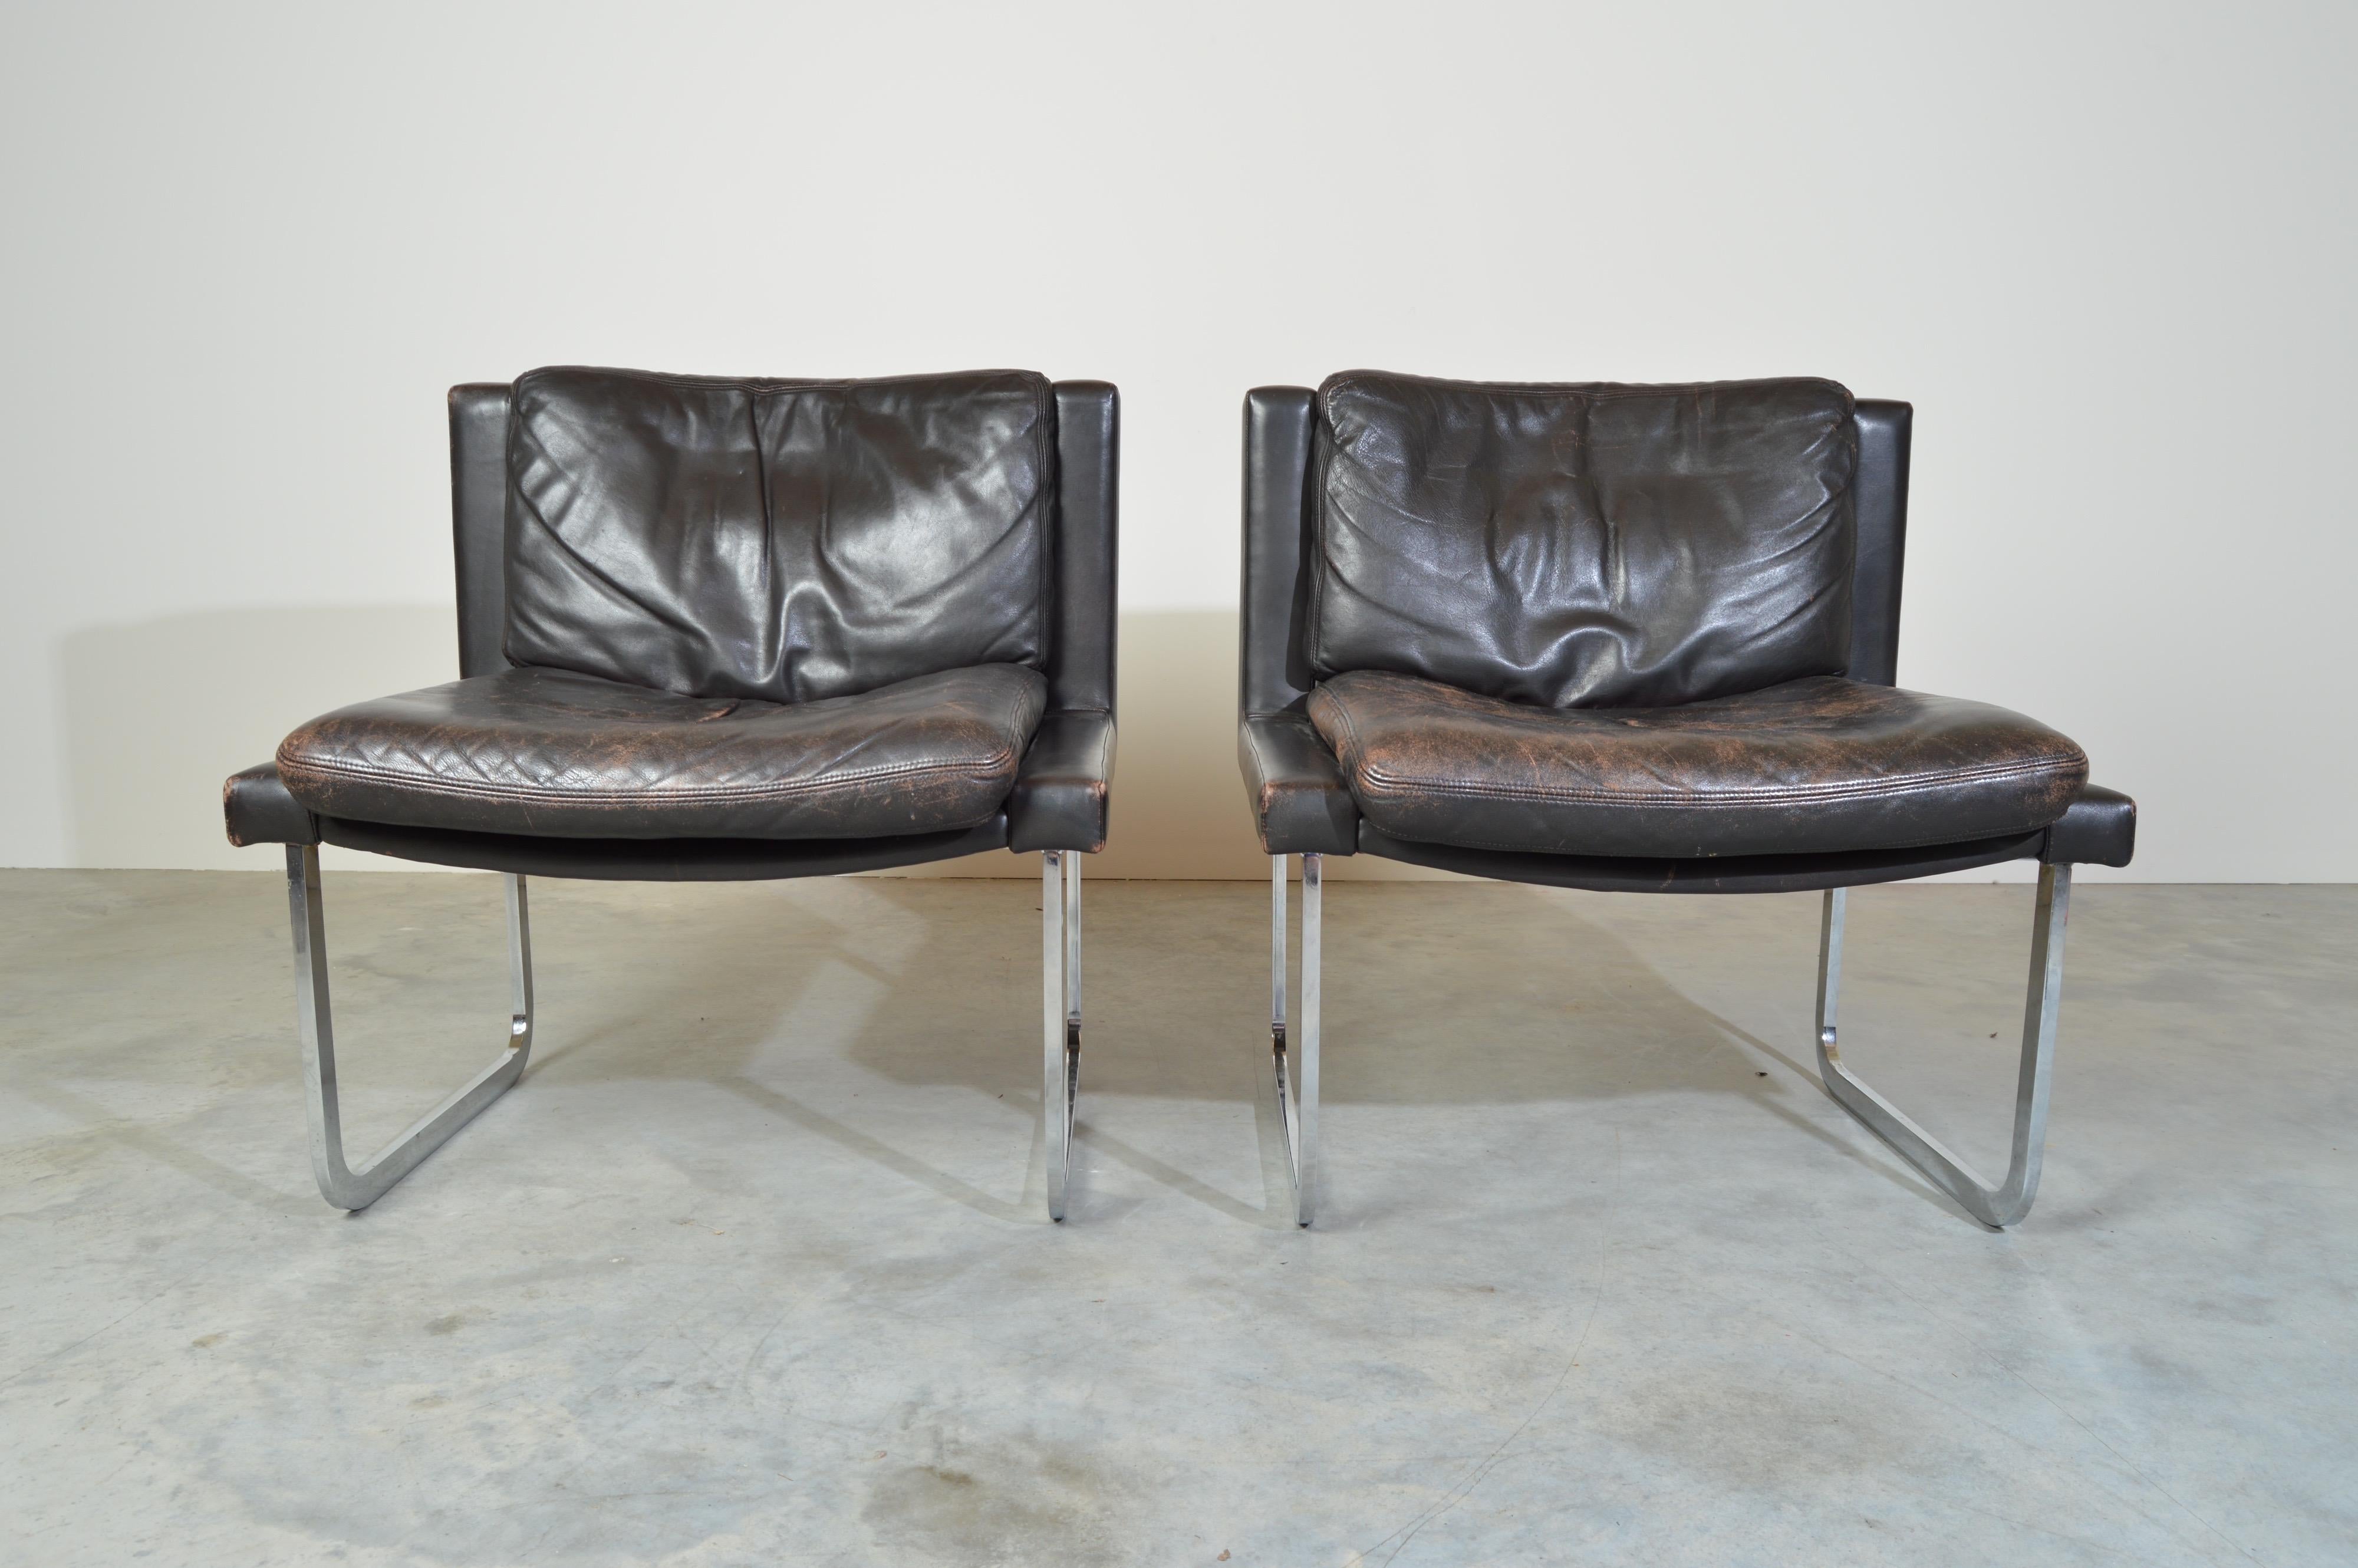 A pair of original Robert Haussmann cantilever chairs in leather and chrome. 
Beautiful patina to the leather. Solid and in great condition throughout. Typical signs of use to the leather. Nothing major.